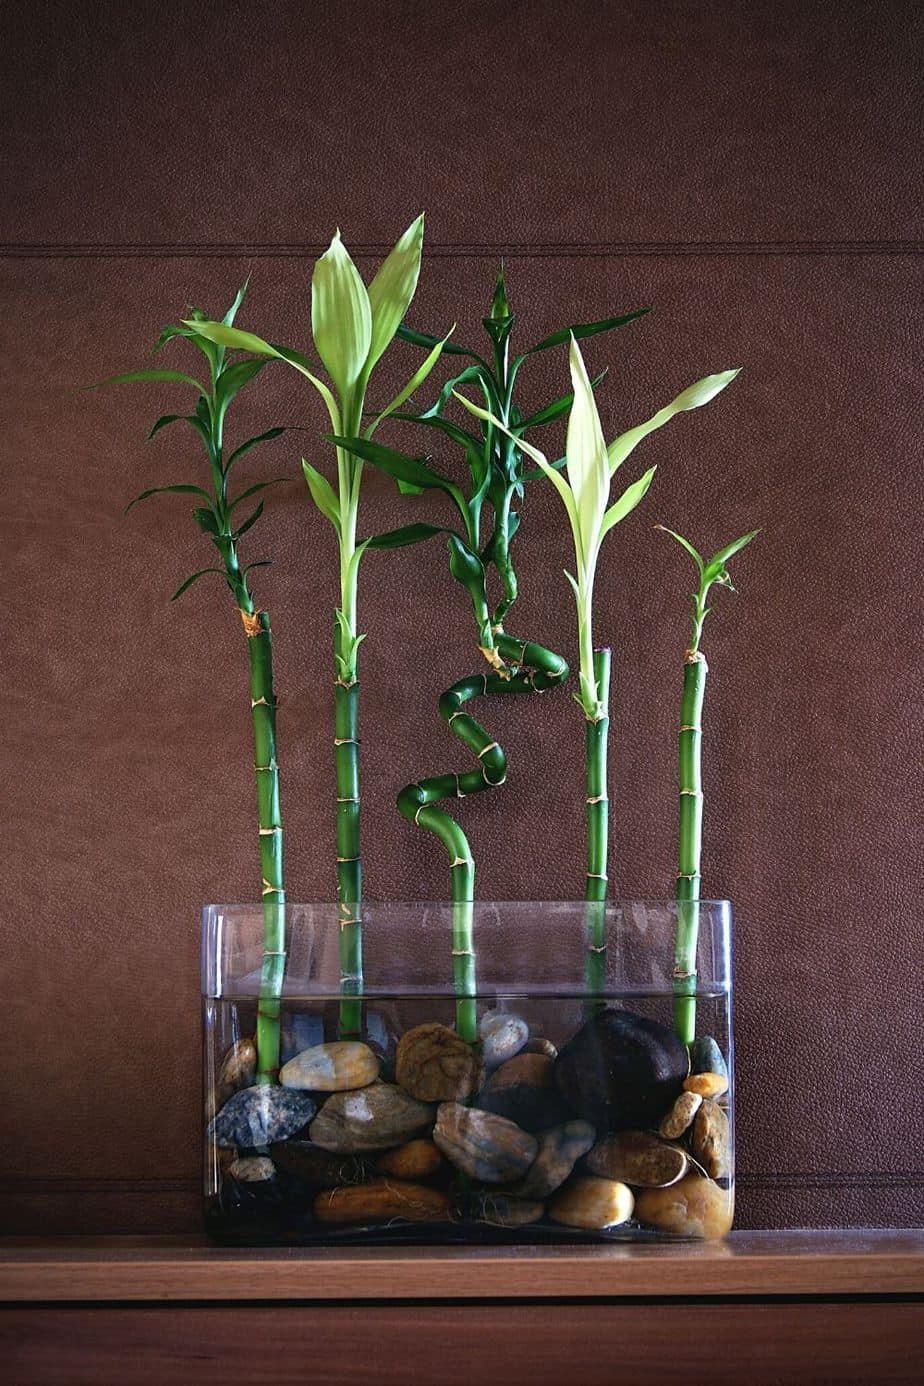 Make sure that the Lucky Bamboo's roots are submerged in water to avoid dehydration